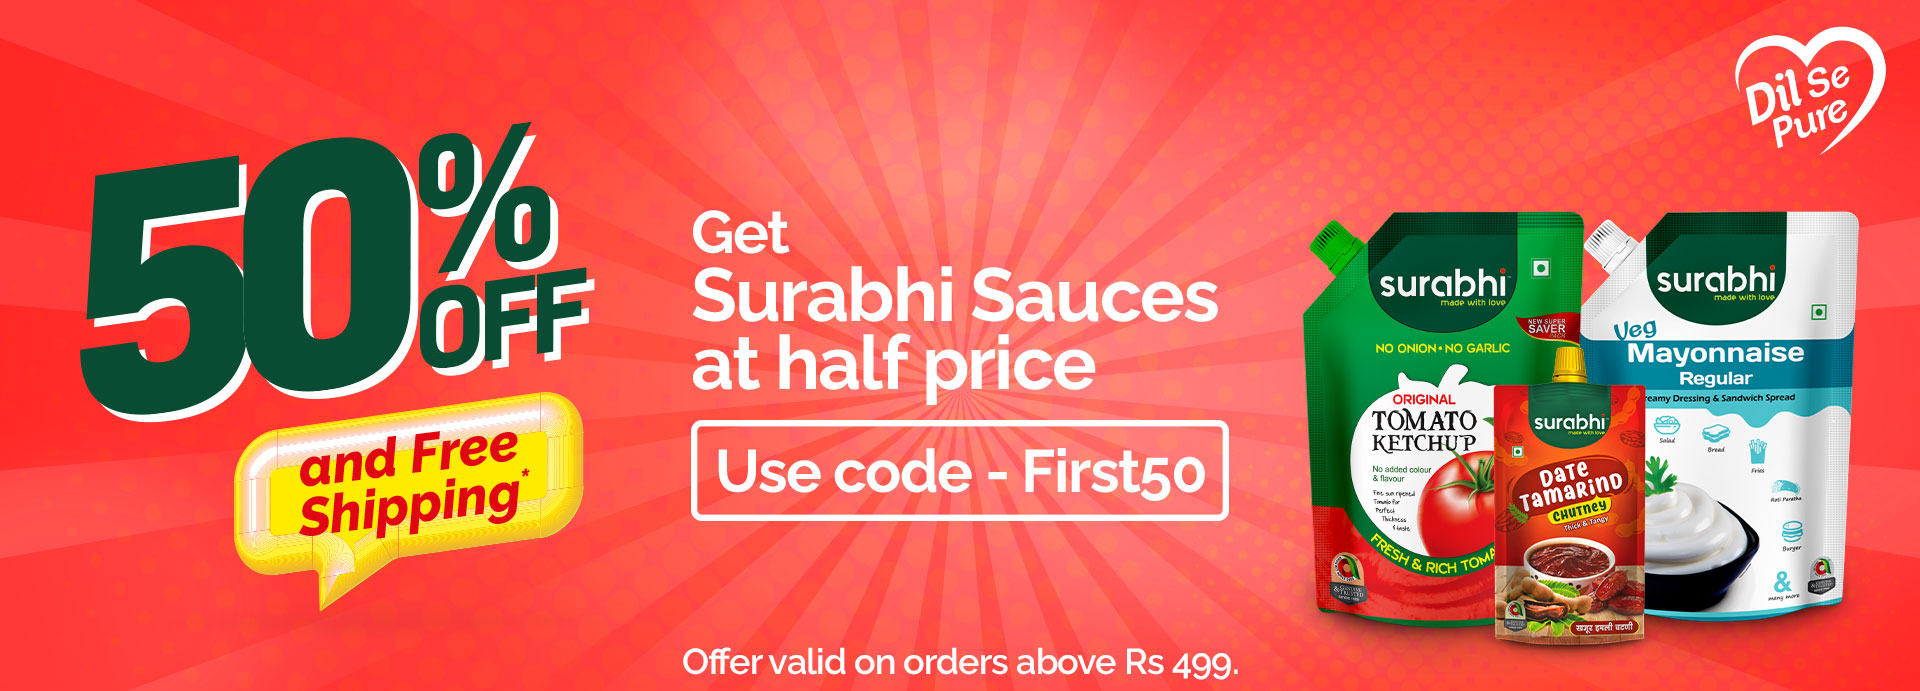 Surabhi Sauces Best offers | Tomato Ketchup offers